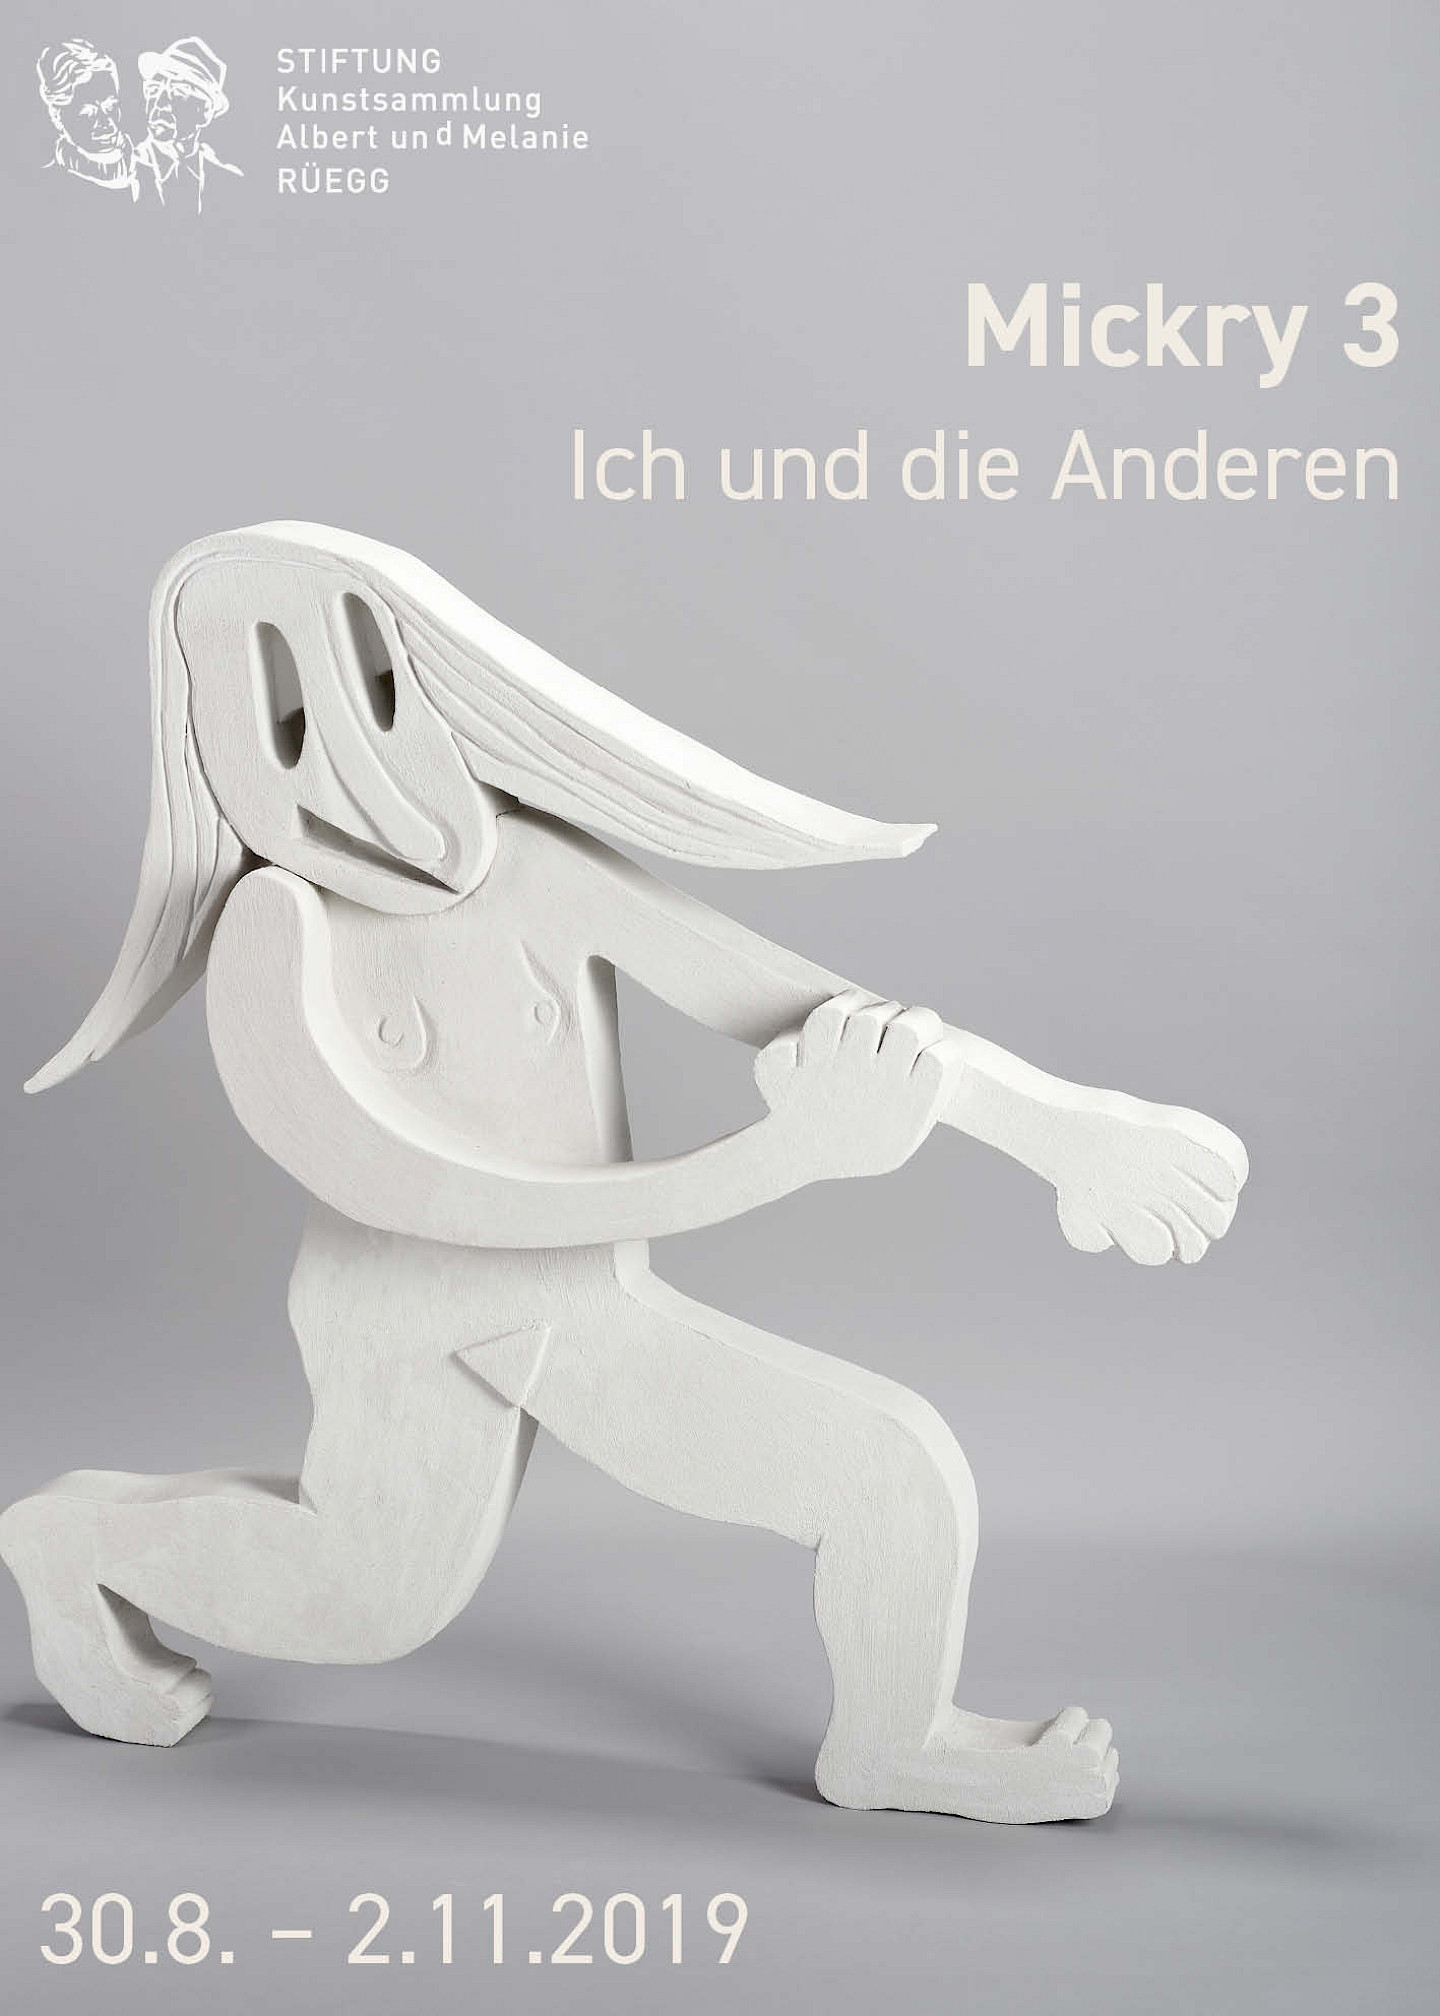 Mickry 3